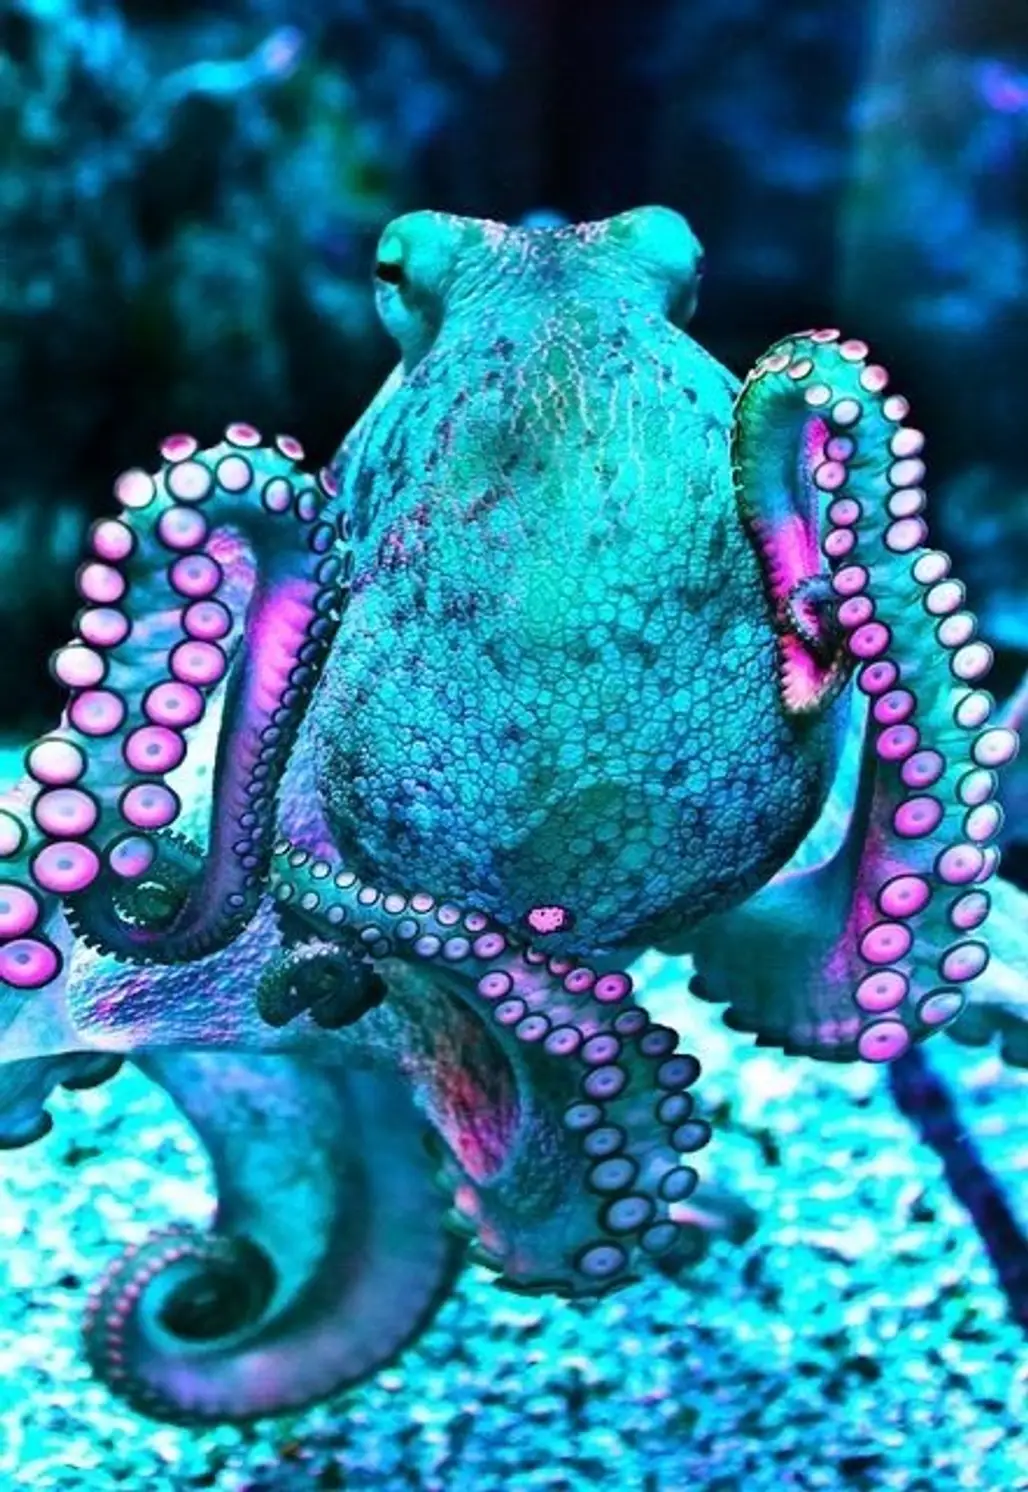 The Mysterious Octopus